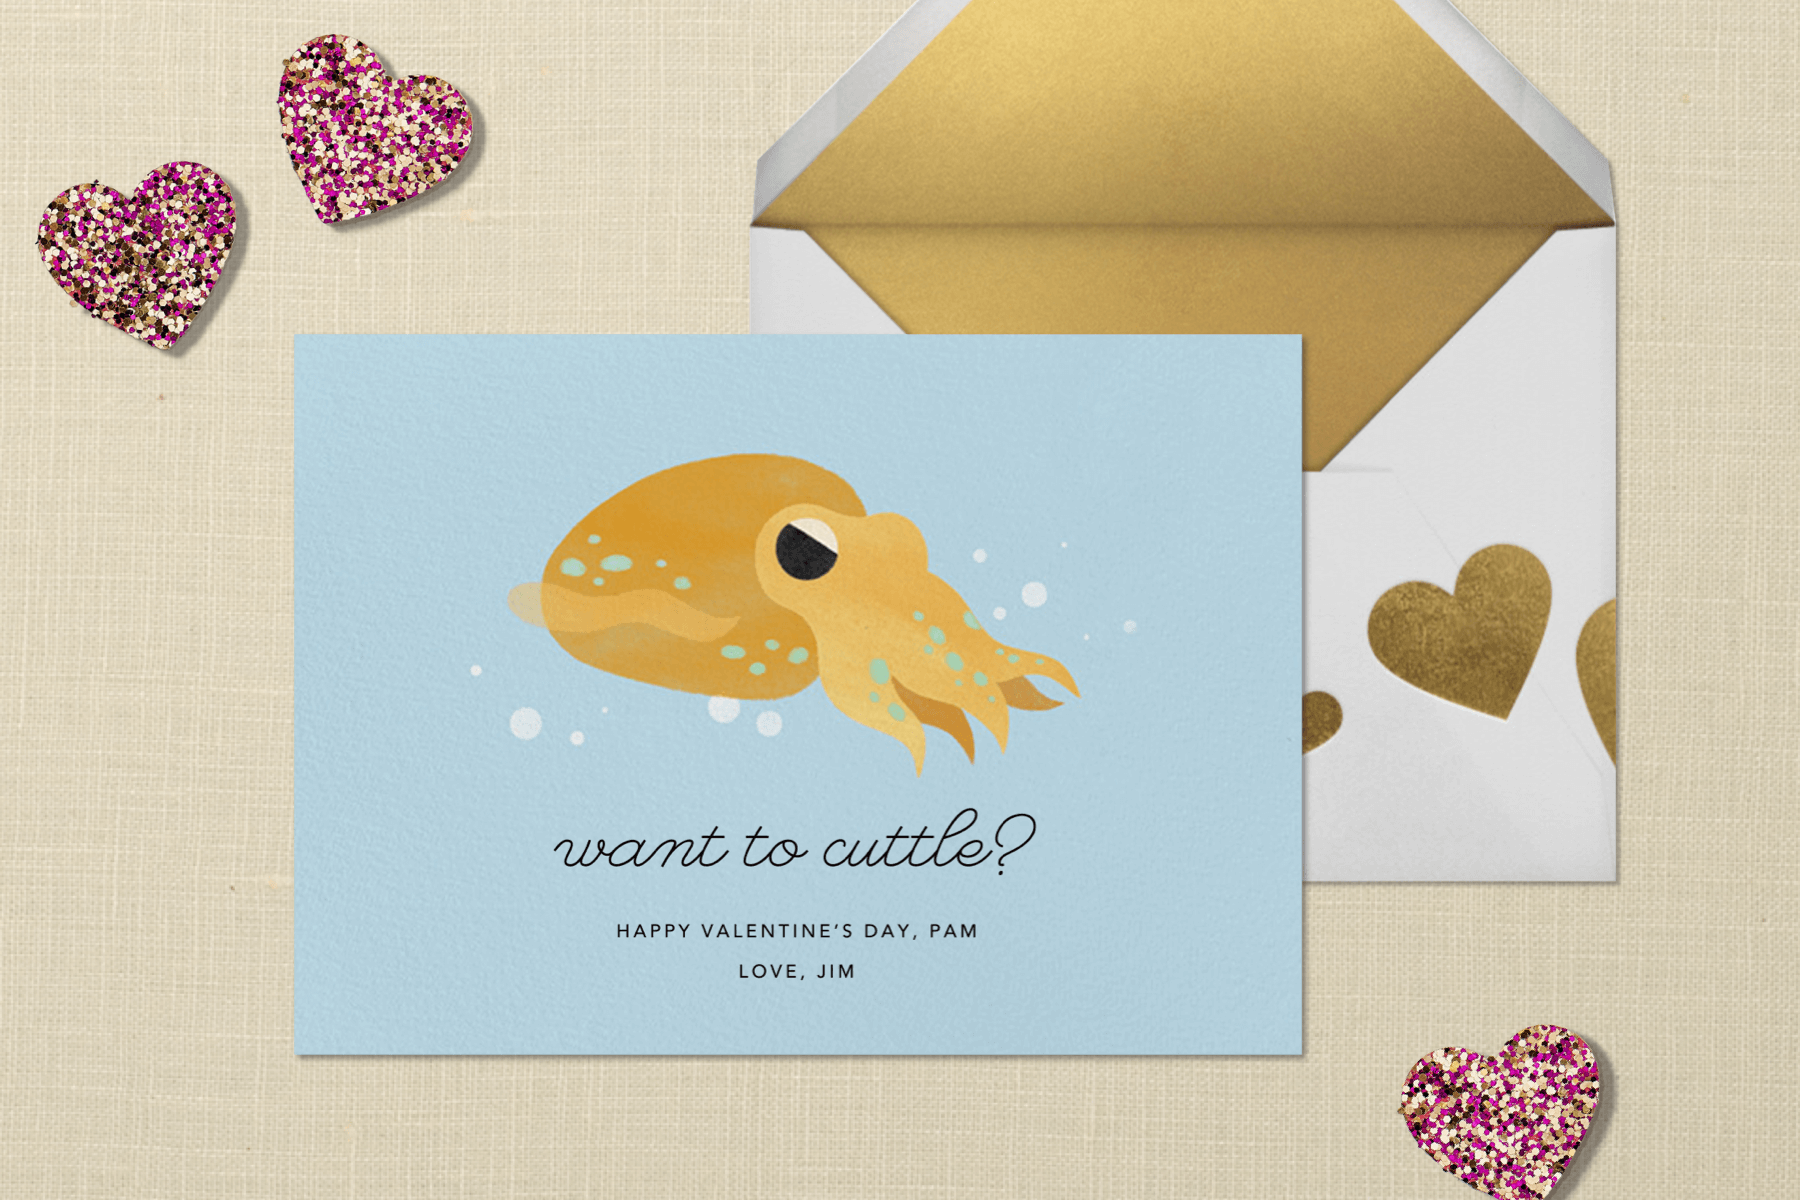 A Valentine’s Day card with an illustration of a cuttlefish.